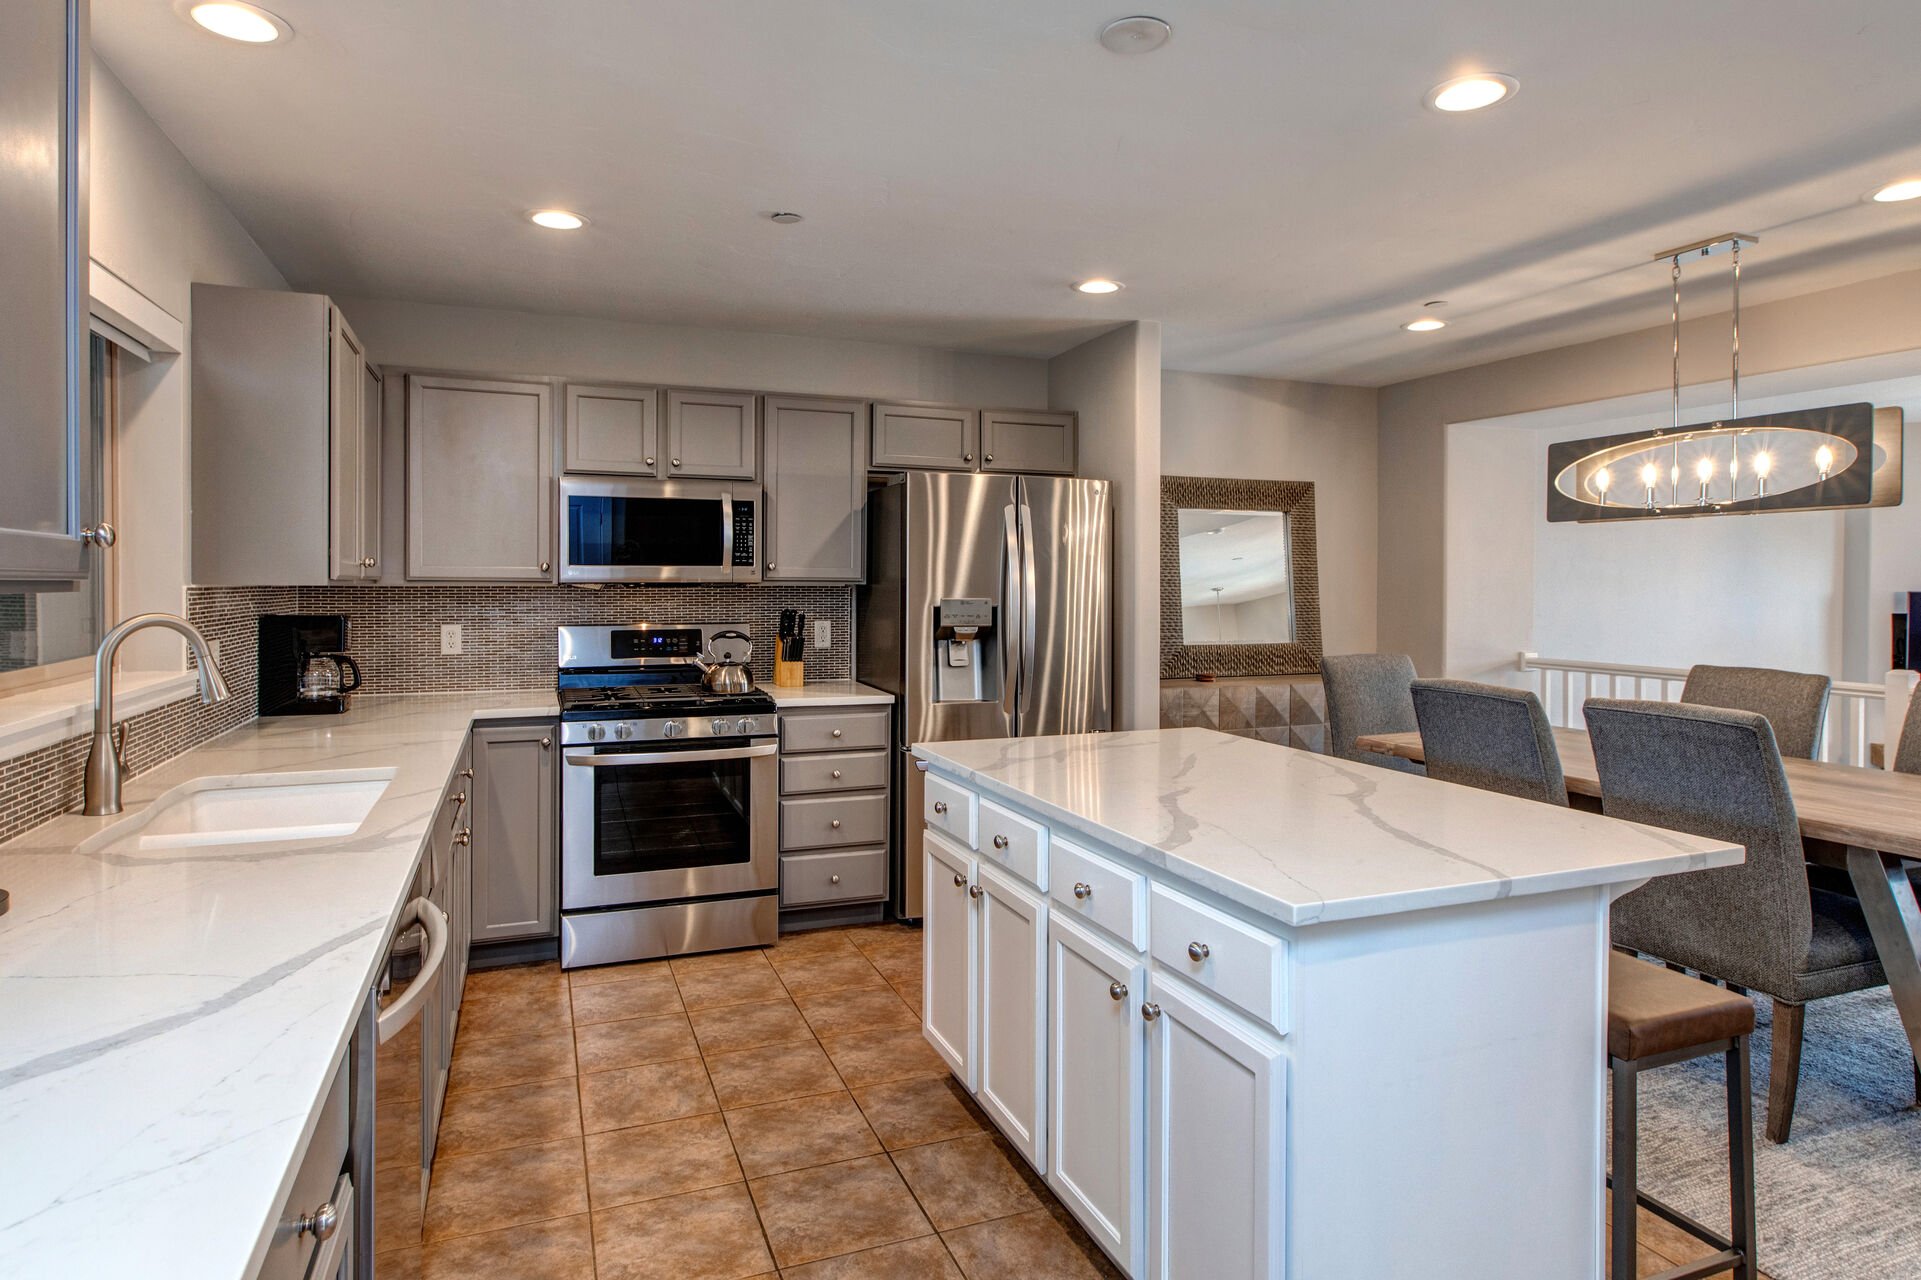 Fully Equipped Kitchen with Granite Countertops, Island Seating for Three, Stainless Steel Appliances, Ample Counter Space and Built-In Ice Maker